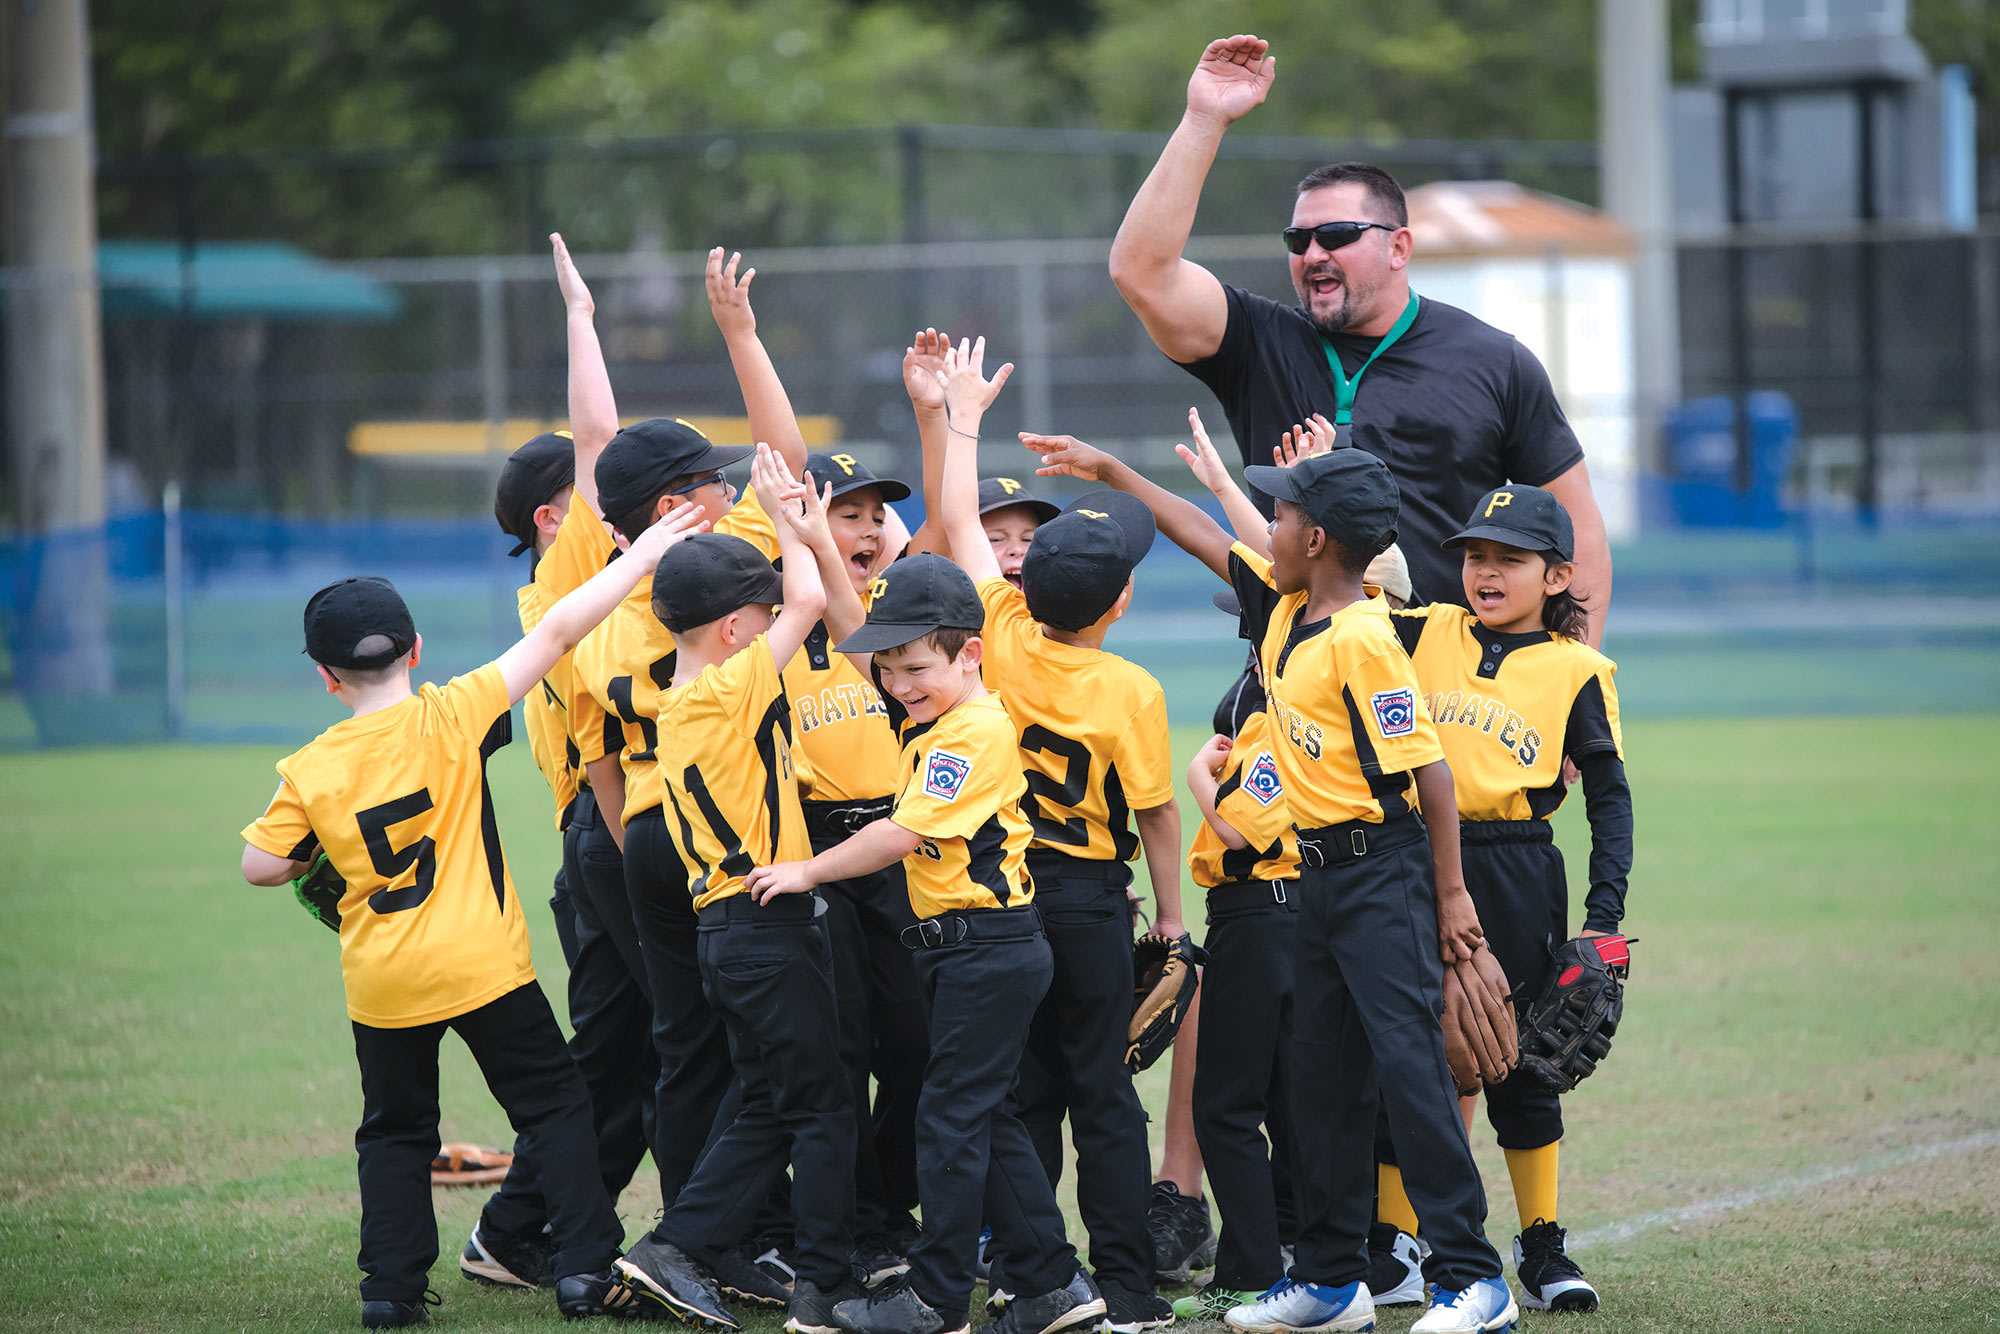 Seven Types Of Little League Coaches (And How To Deal With Them)